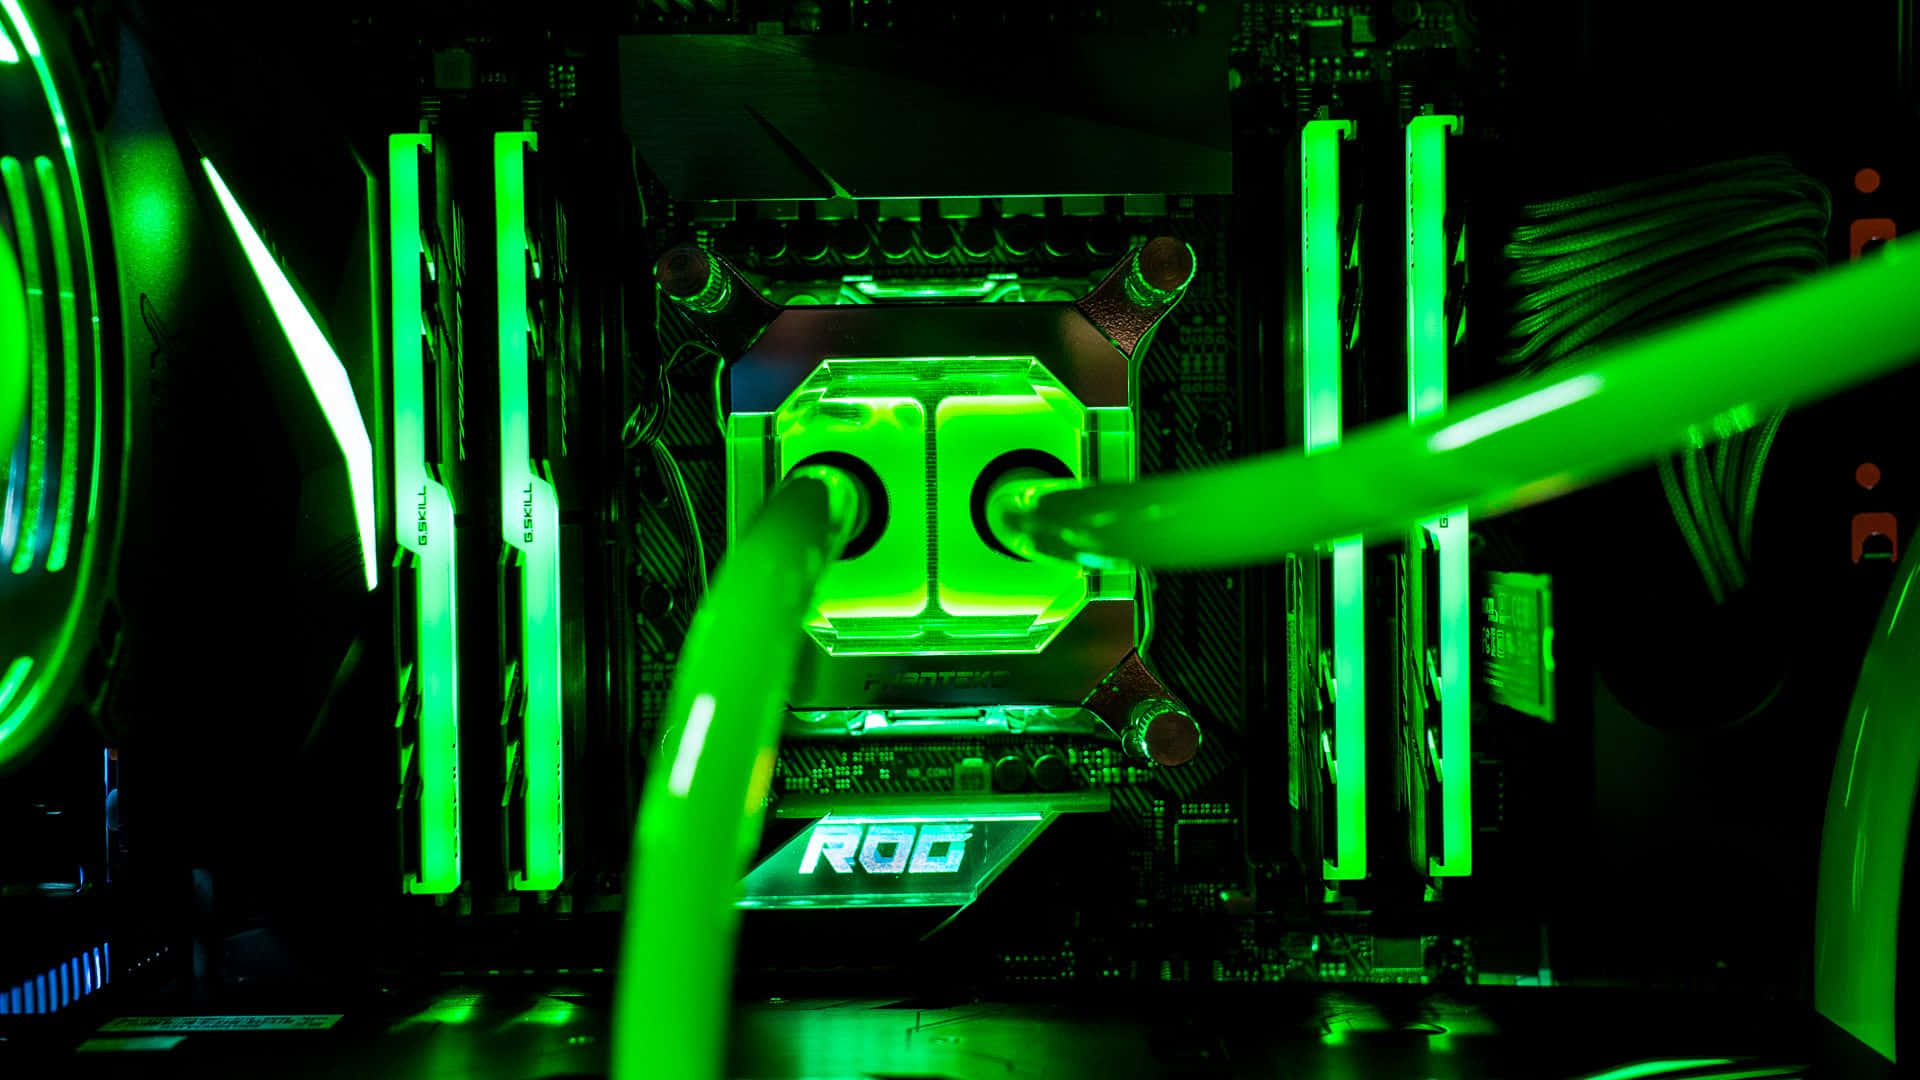 Aesthetic Green Neon ROG Pictures